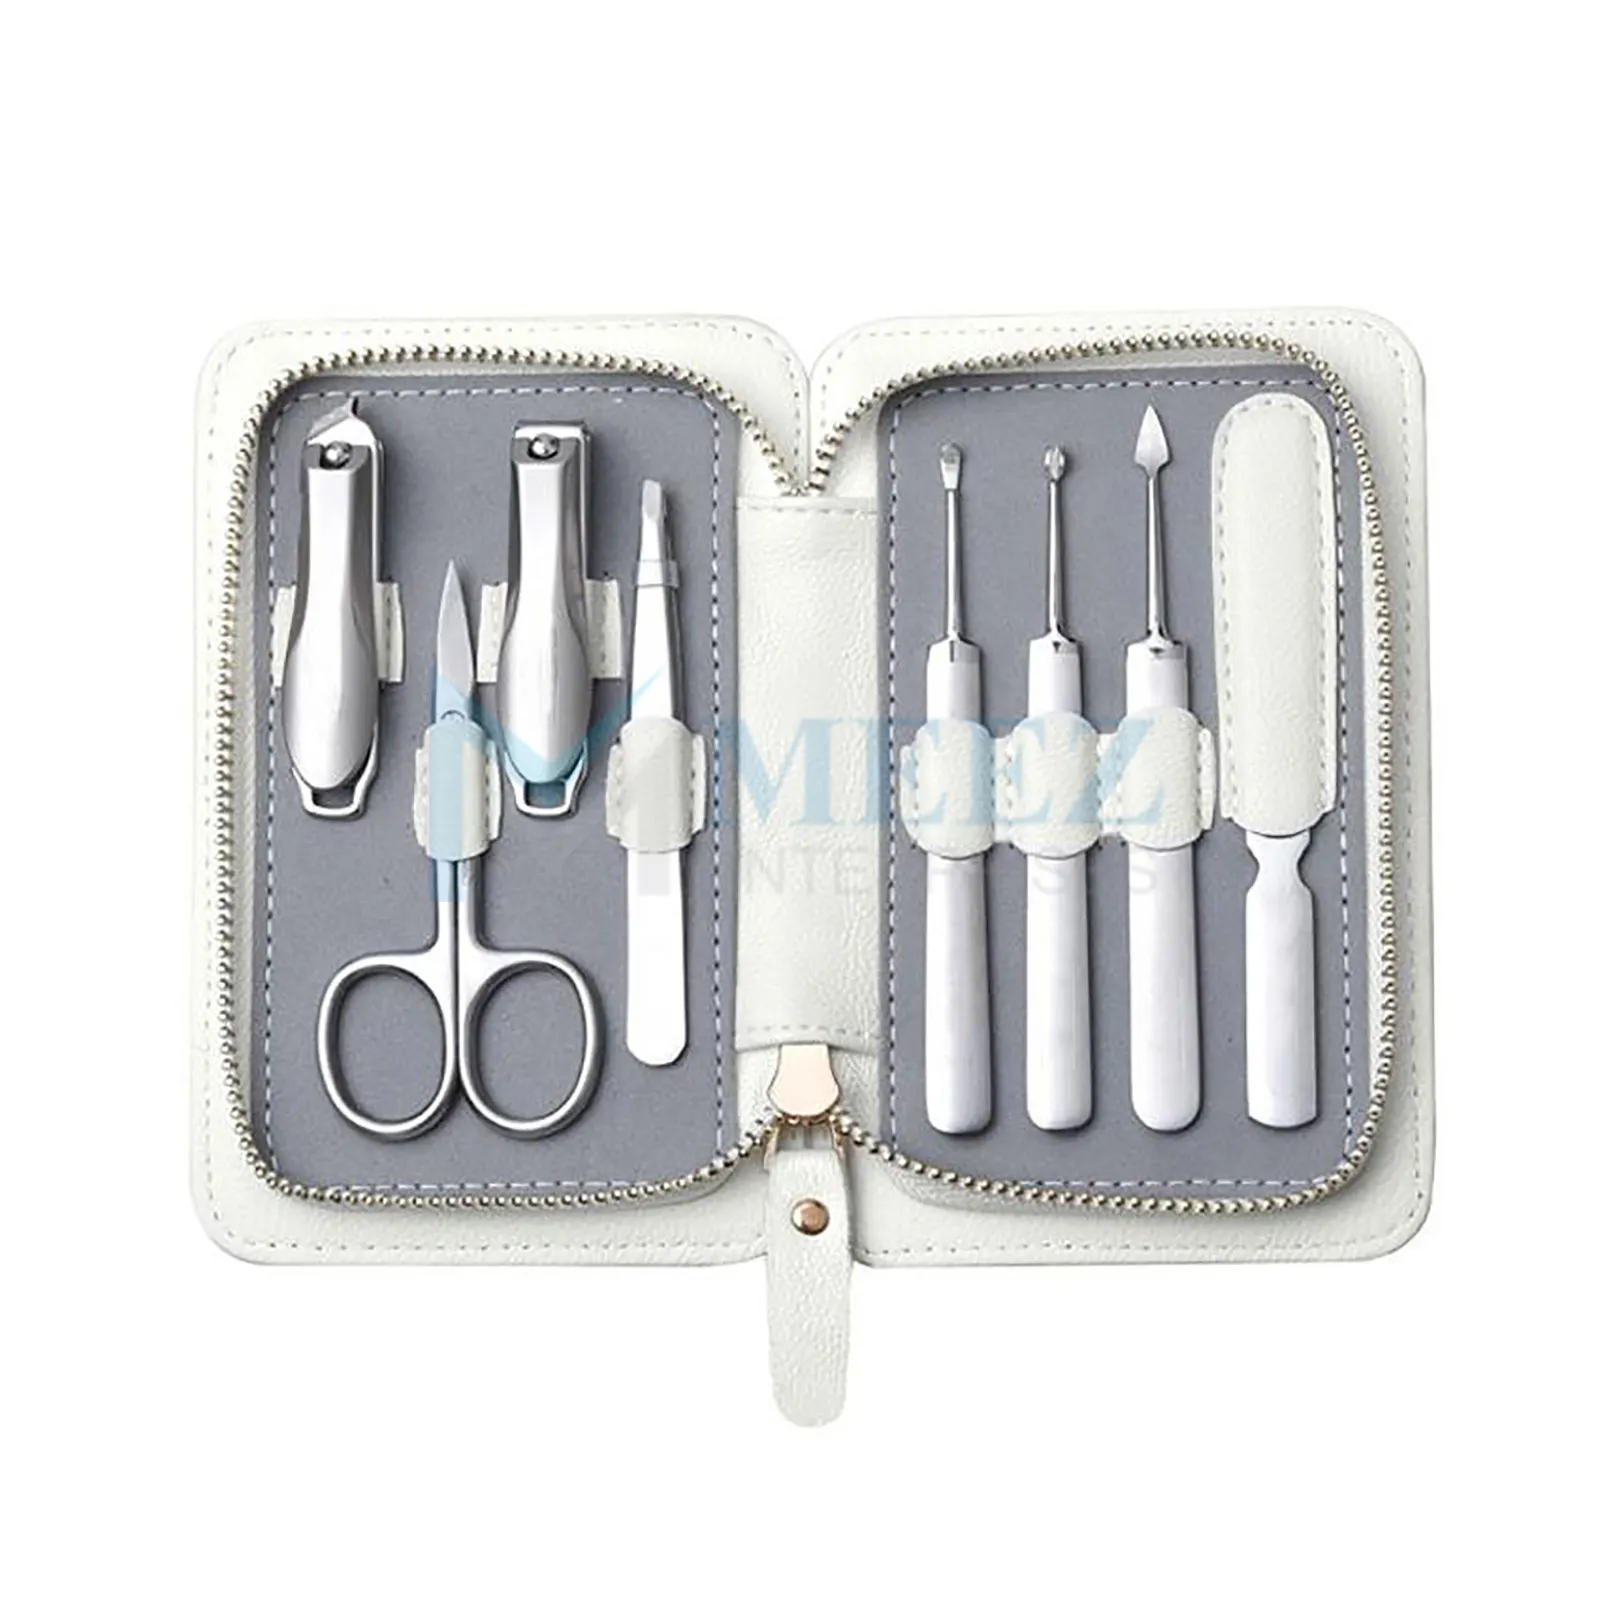 High Quality Stainless Steel Manicure & Pedicure Set Nail Cutter Set Luxury Nail Clipper Manicure kit